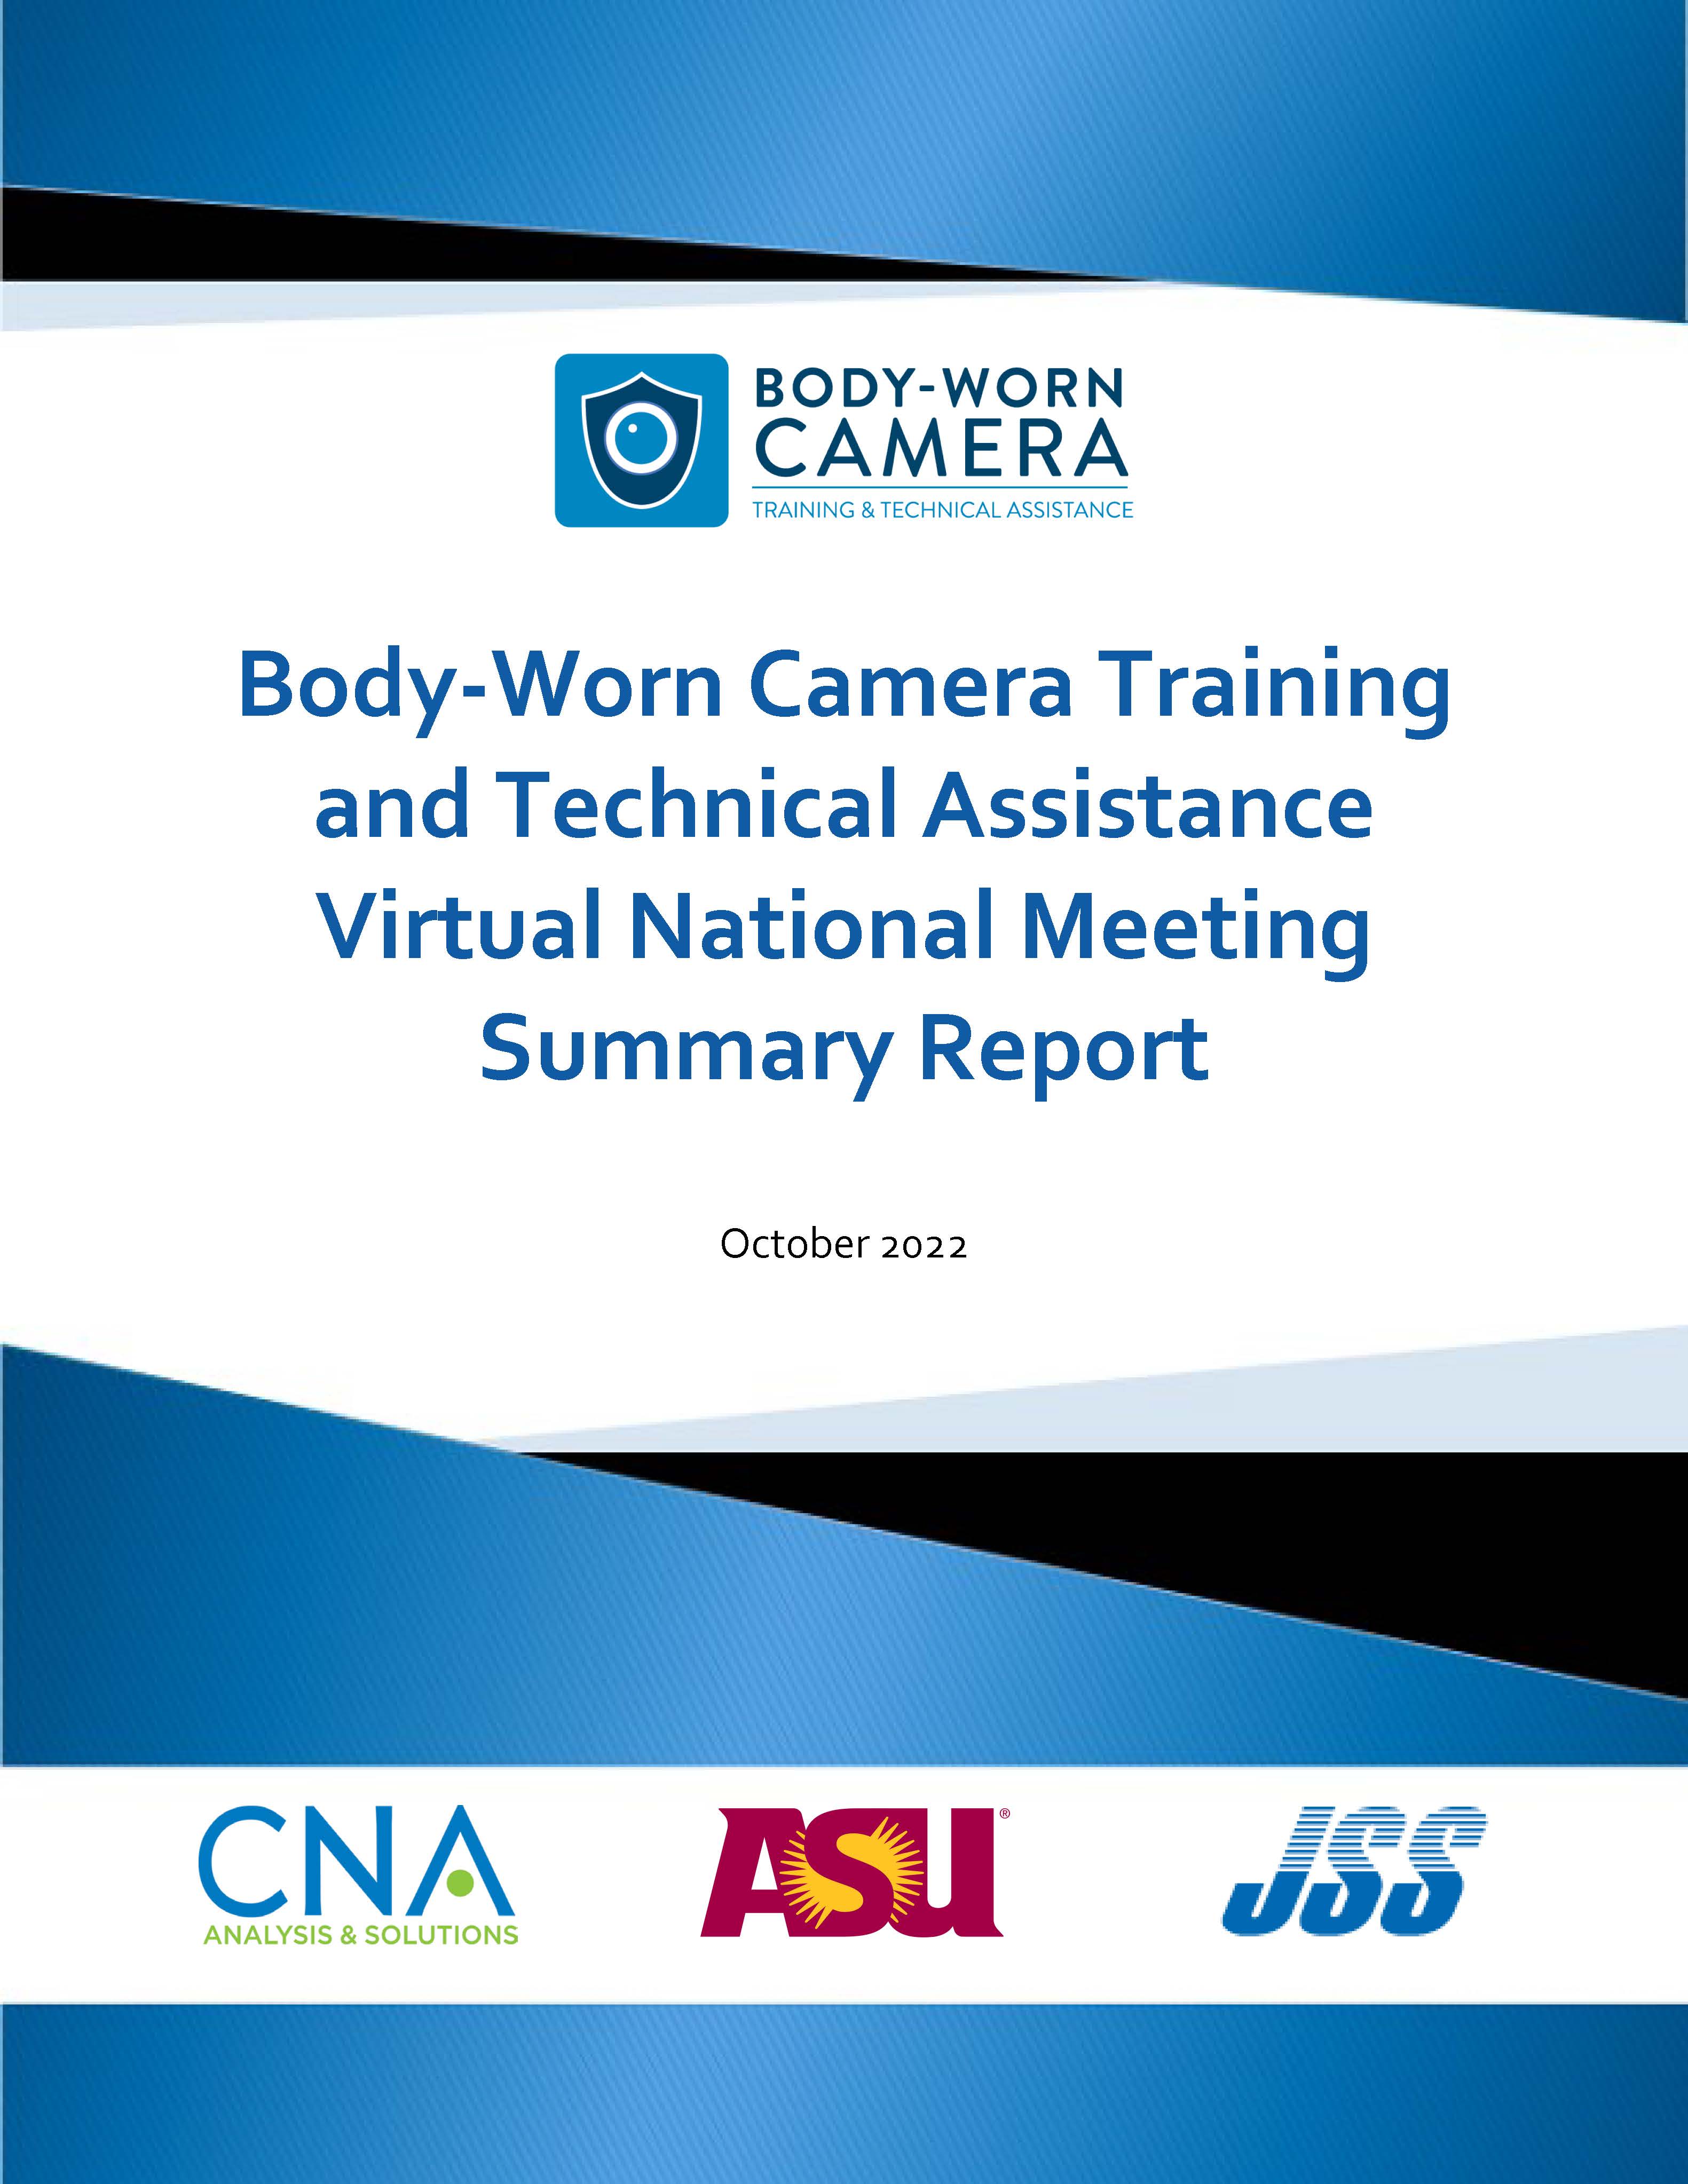 2022 Body-Worn Camera Training and Technical Assistance Virtual National Meeting Summary Report Cover Page